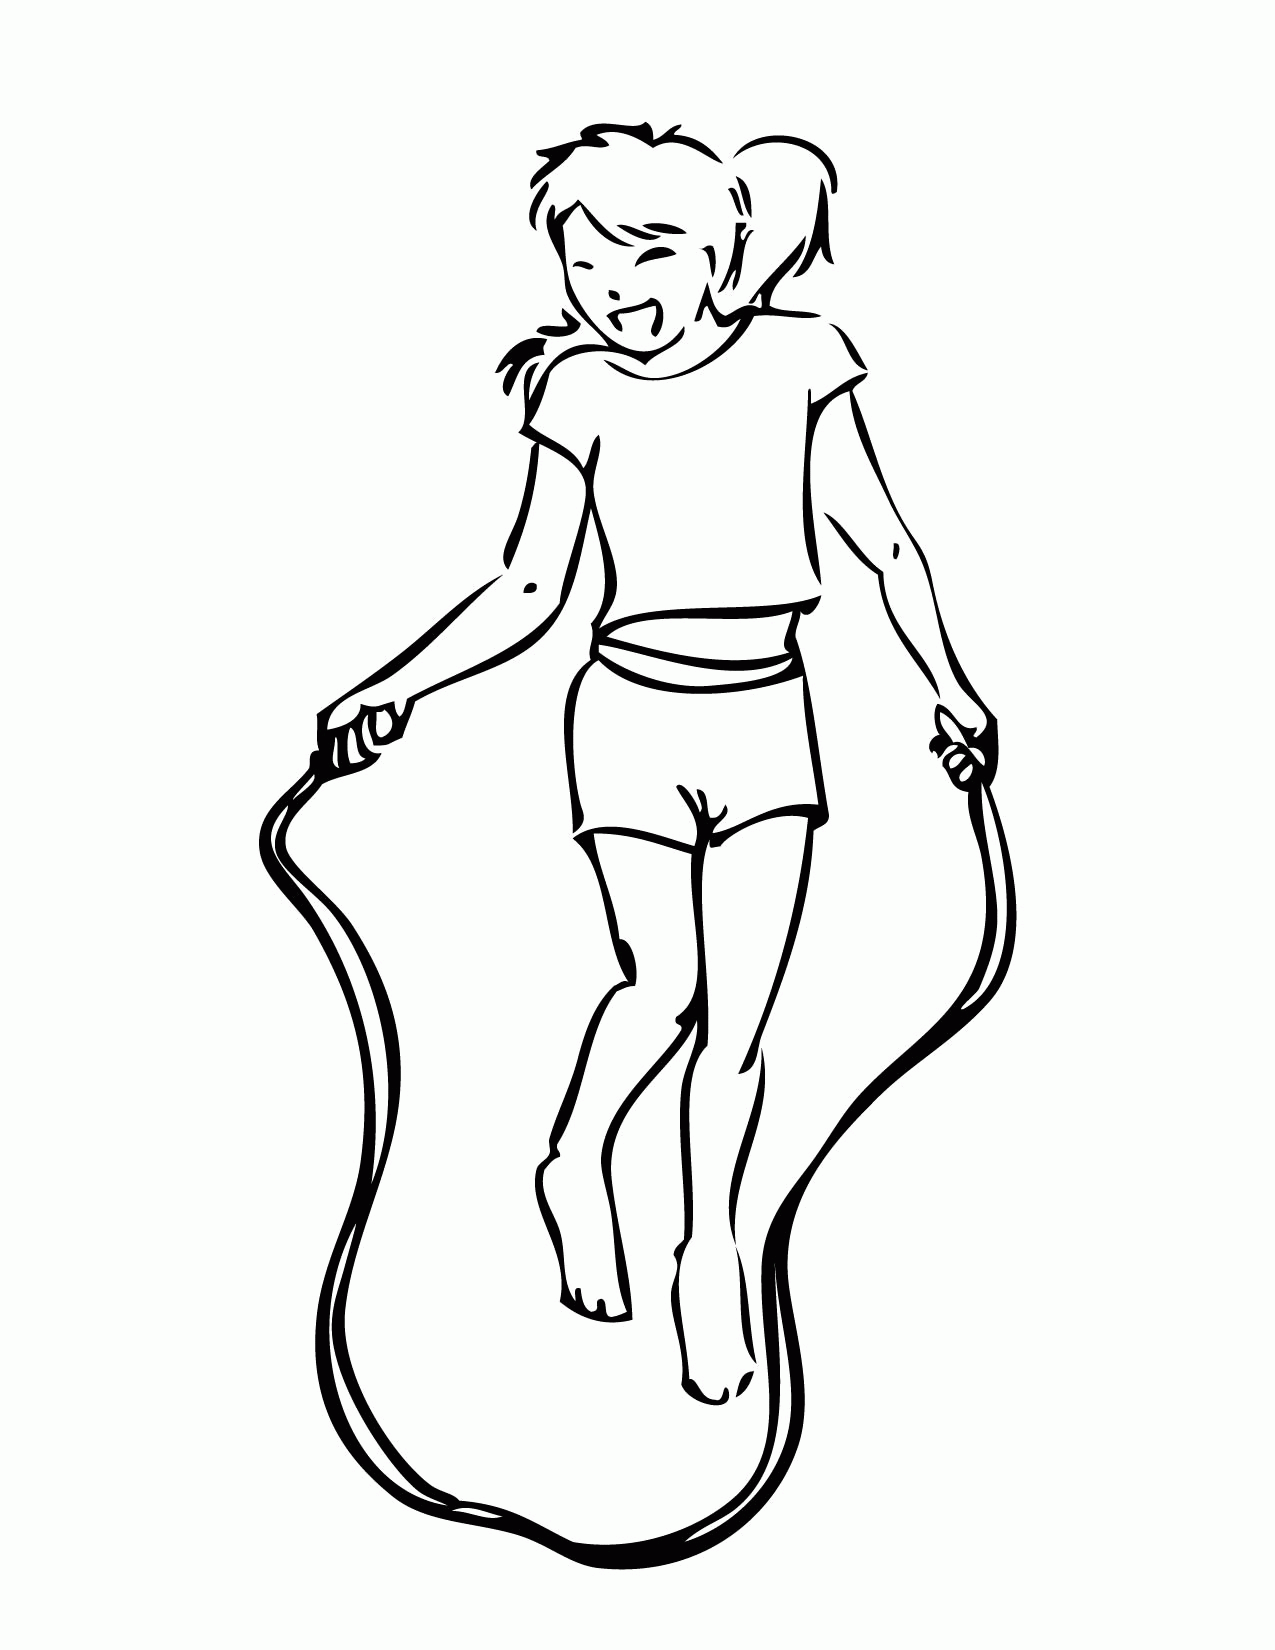 Jump rope coloring pages download and print for free